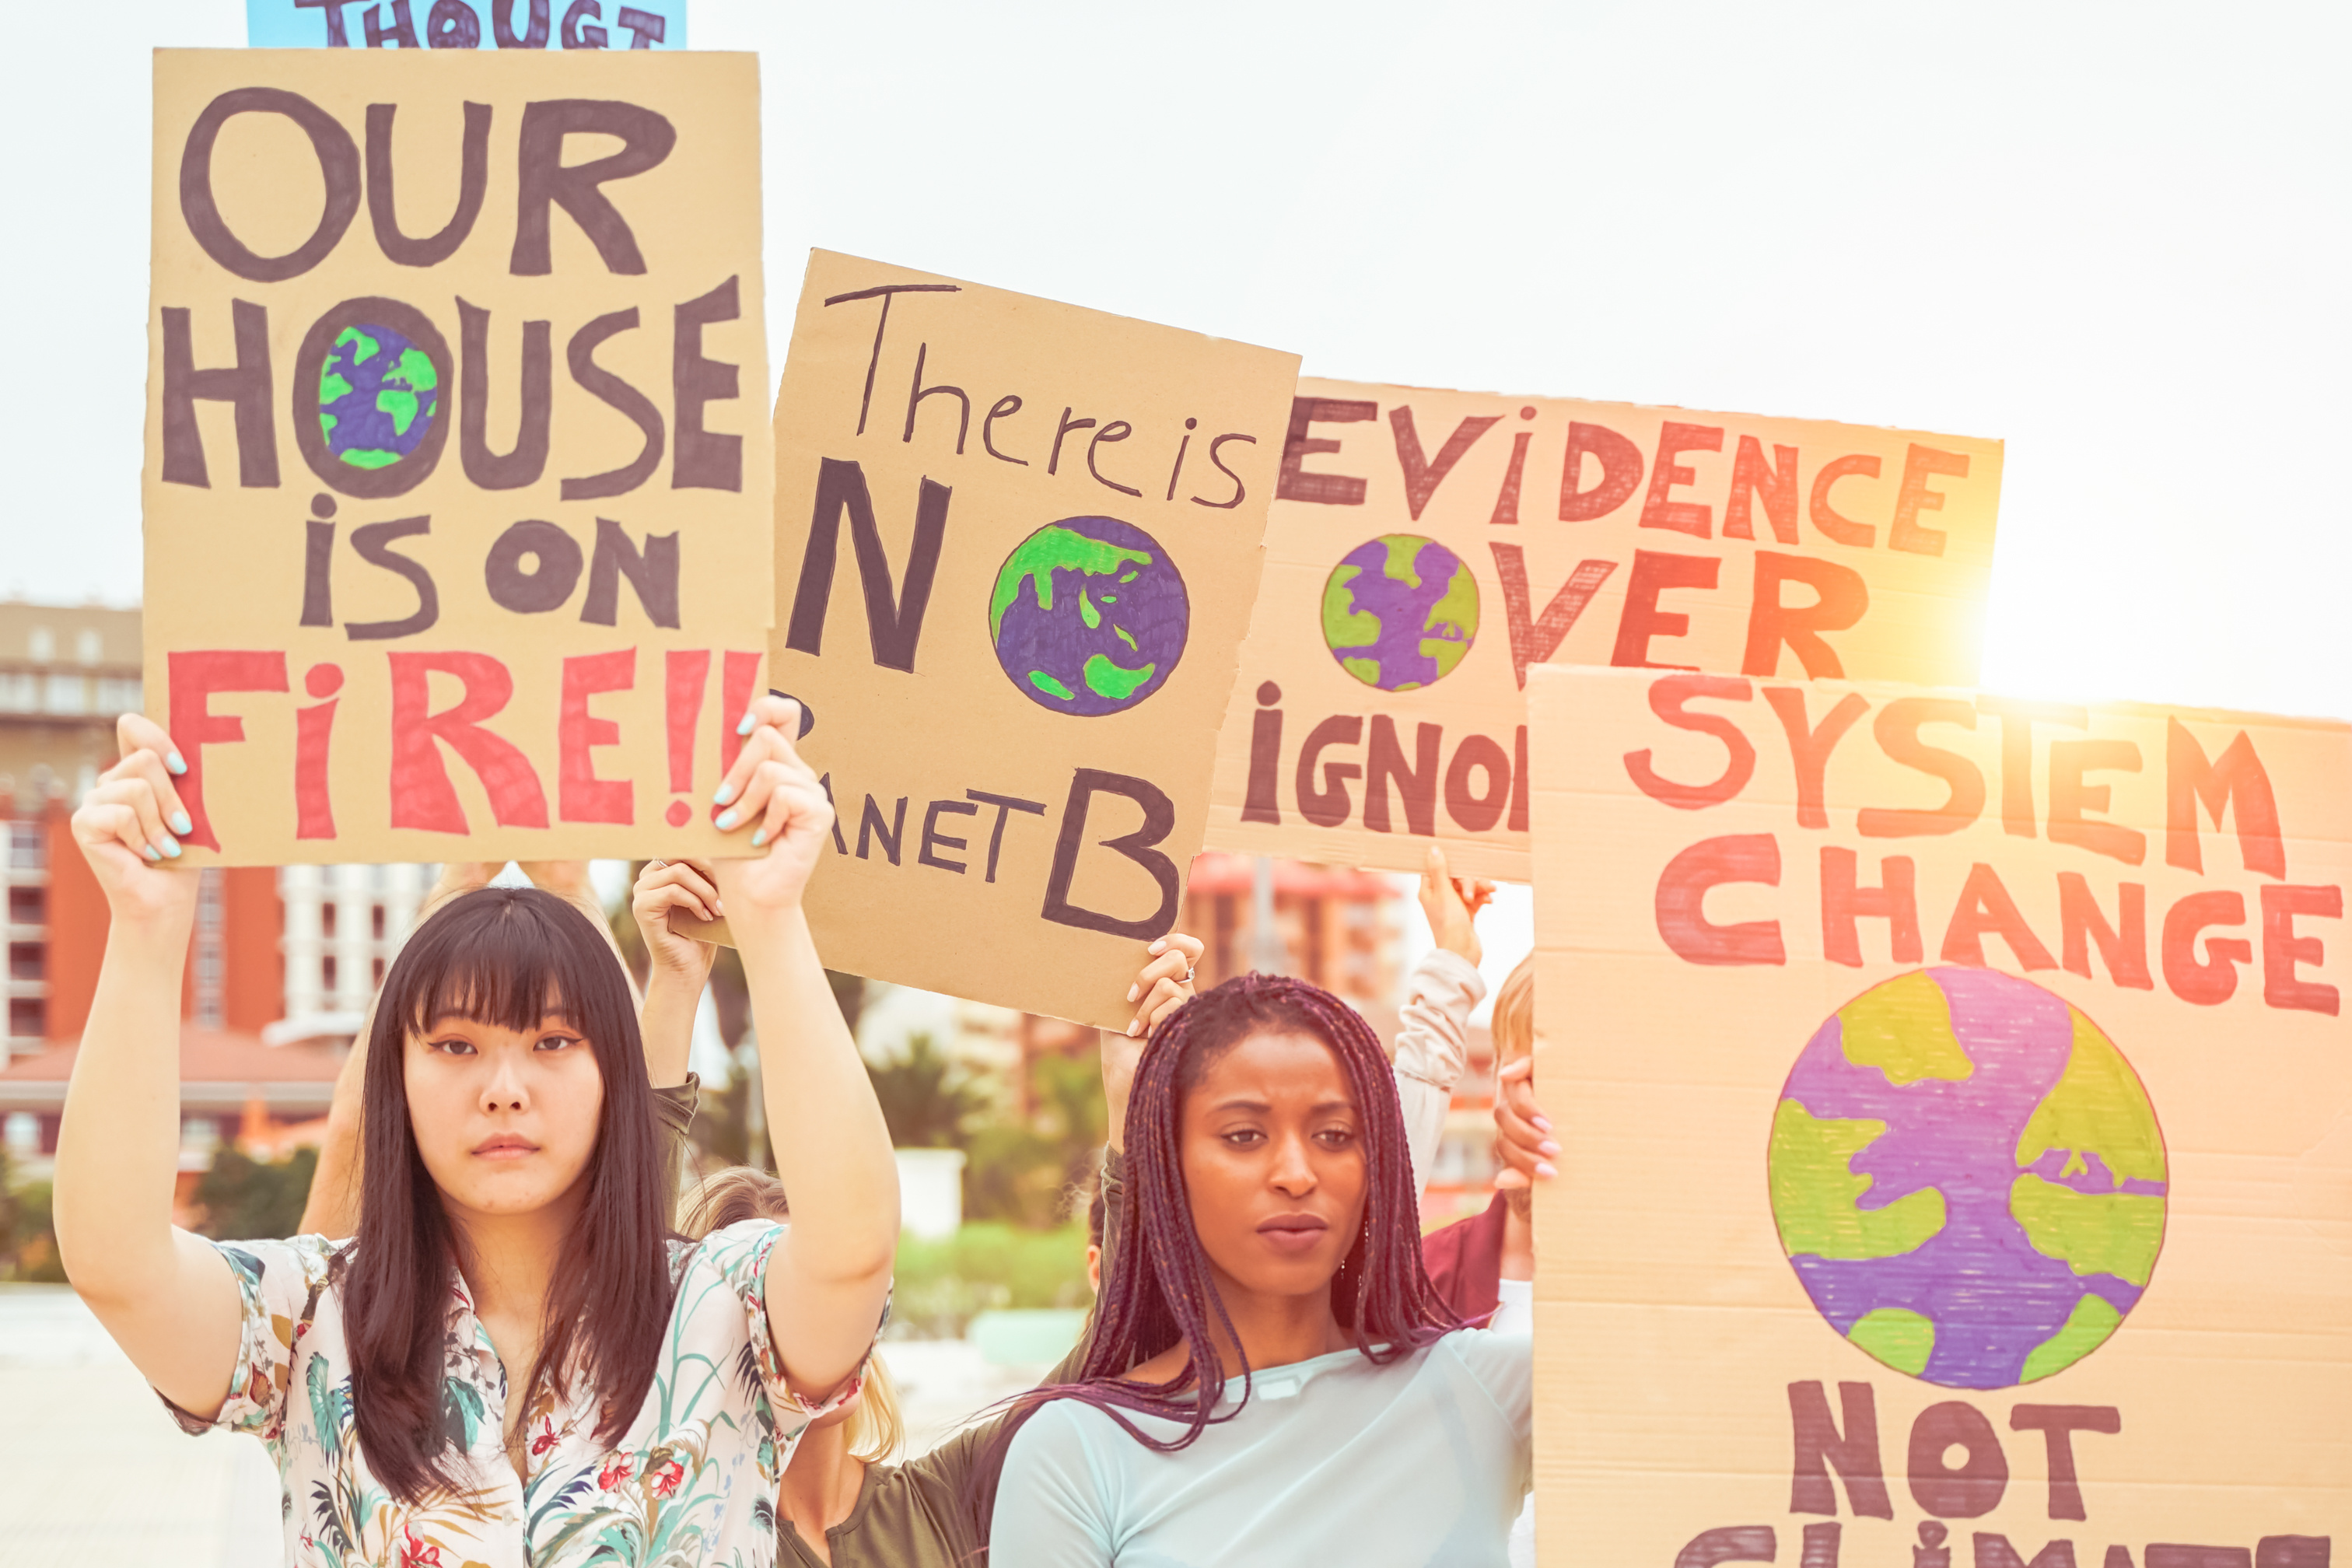 A group of youth stand together with signs about climate change